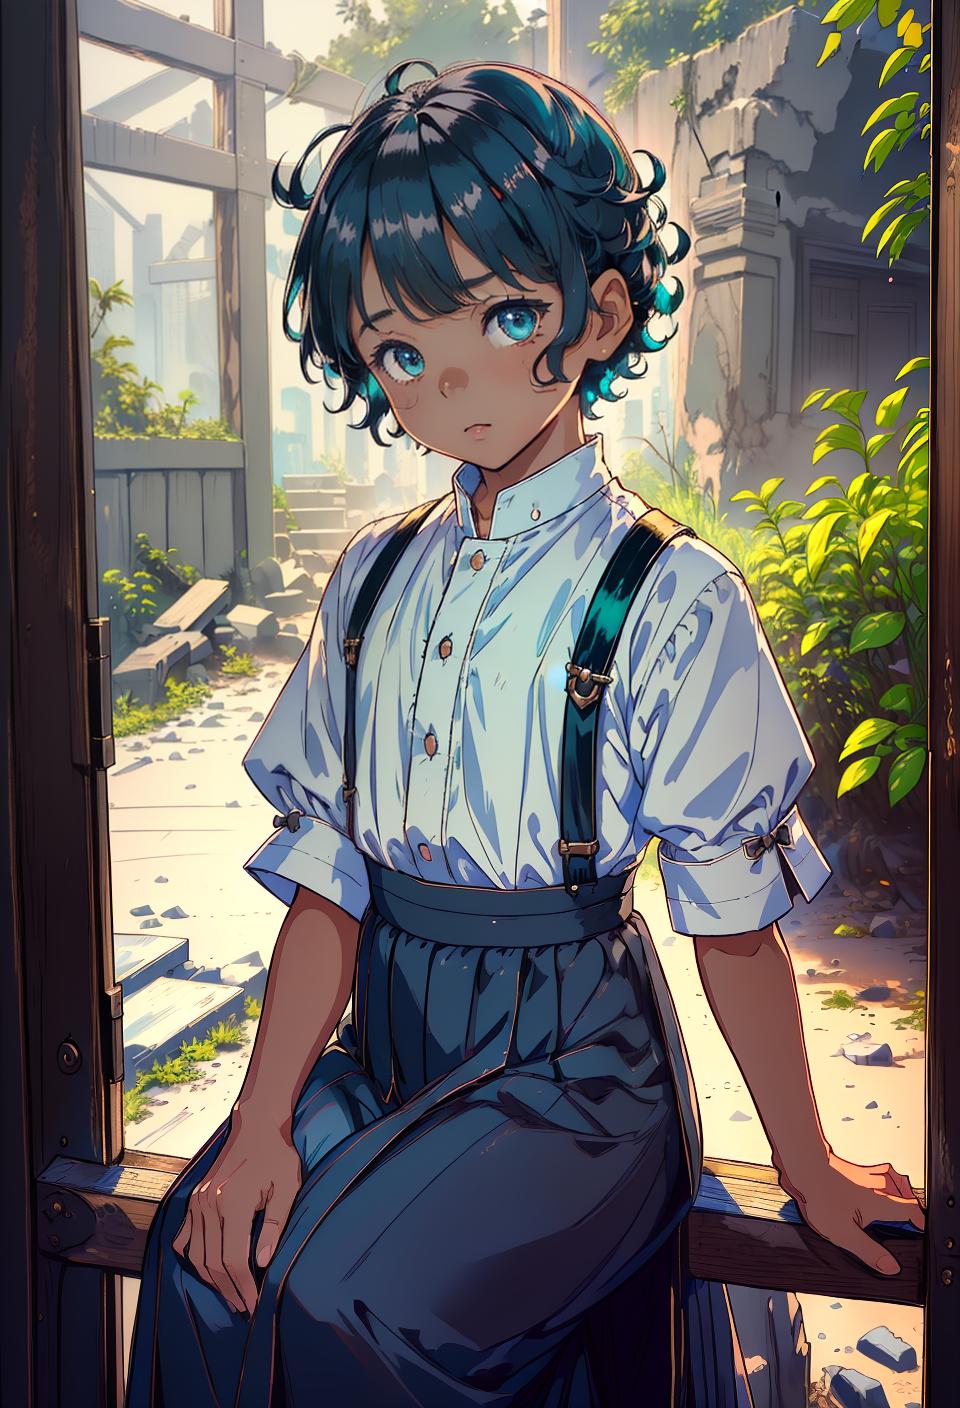  ((trending, highres, masterpiece, cinematic shot)), 1boy, chibi, male Amish outfit, ruins scene, short curly aqua hair, side-swept bangs,  amber eyes, doting personality, mischievous expression, dark skin, magical, lucky